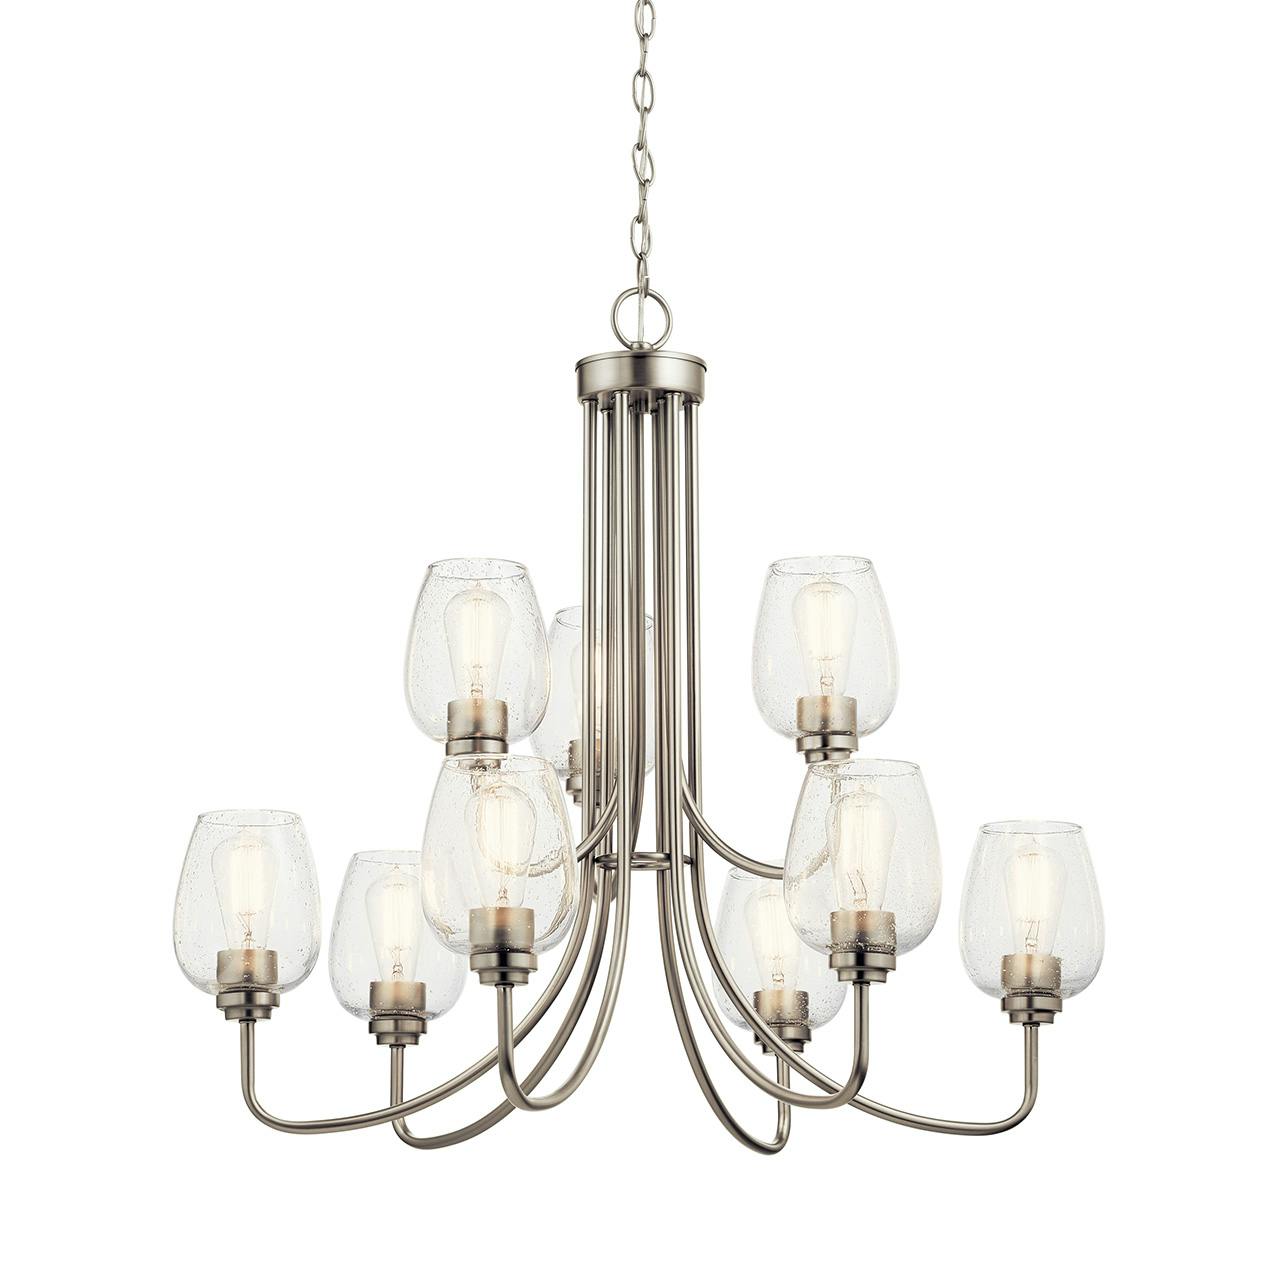 Valserrano 9 Light Chandelier Nickel without the canopy on a white background